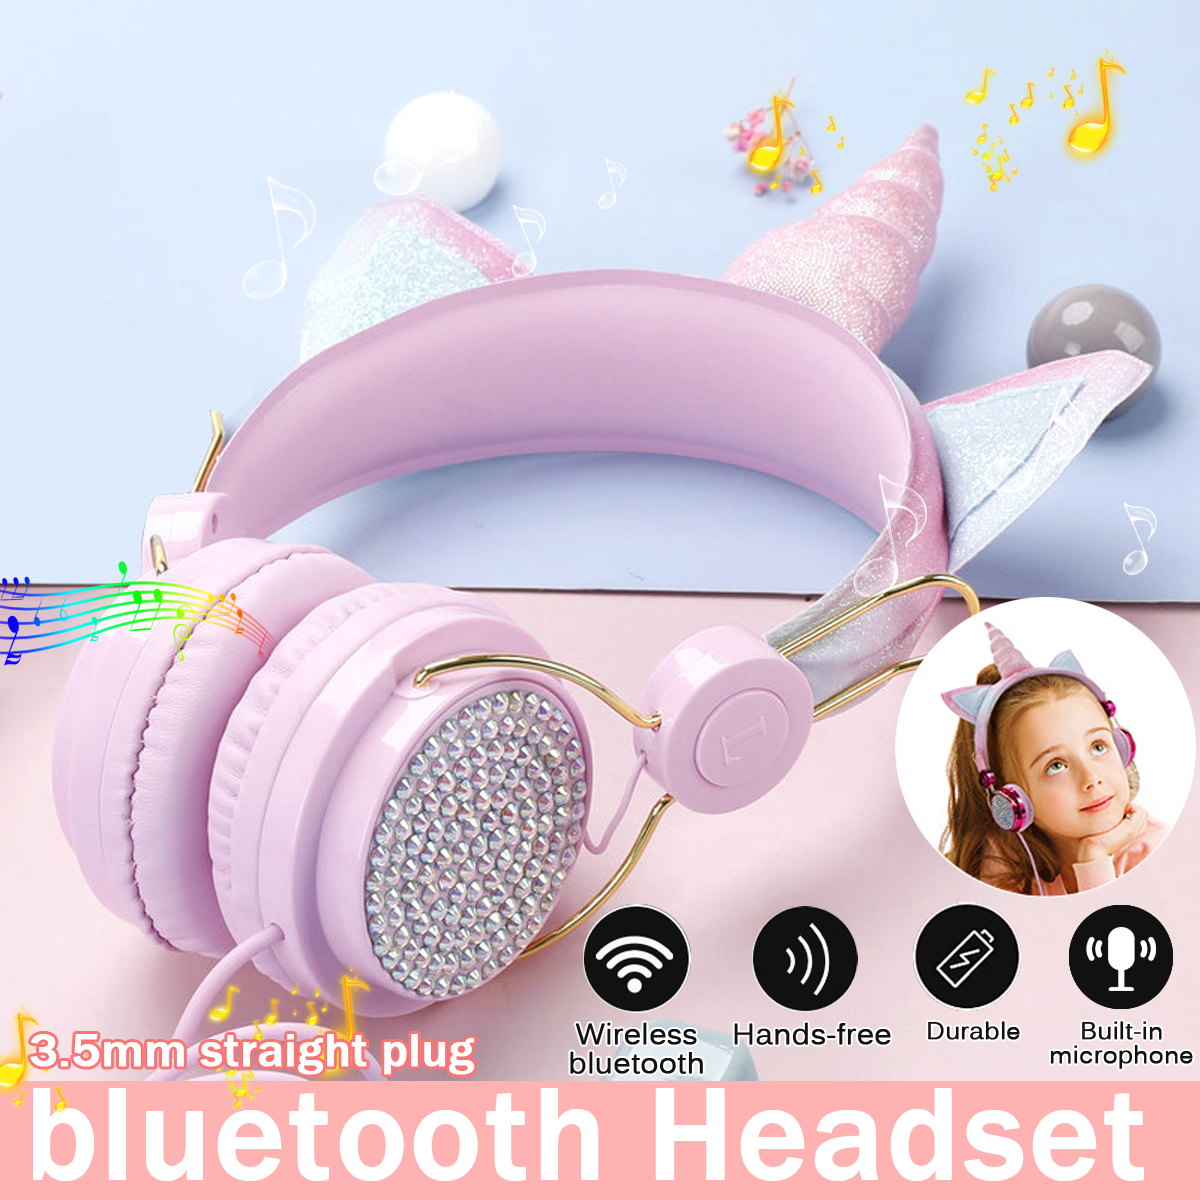 Wired-Headphone-Portable-Foldable-35mm-Plug-Over-ear-Stereo-Music-Sport-Headset-with-Mic-1778193-2